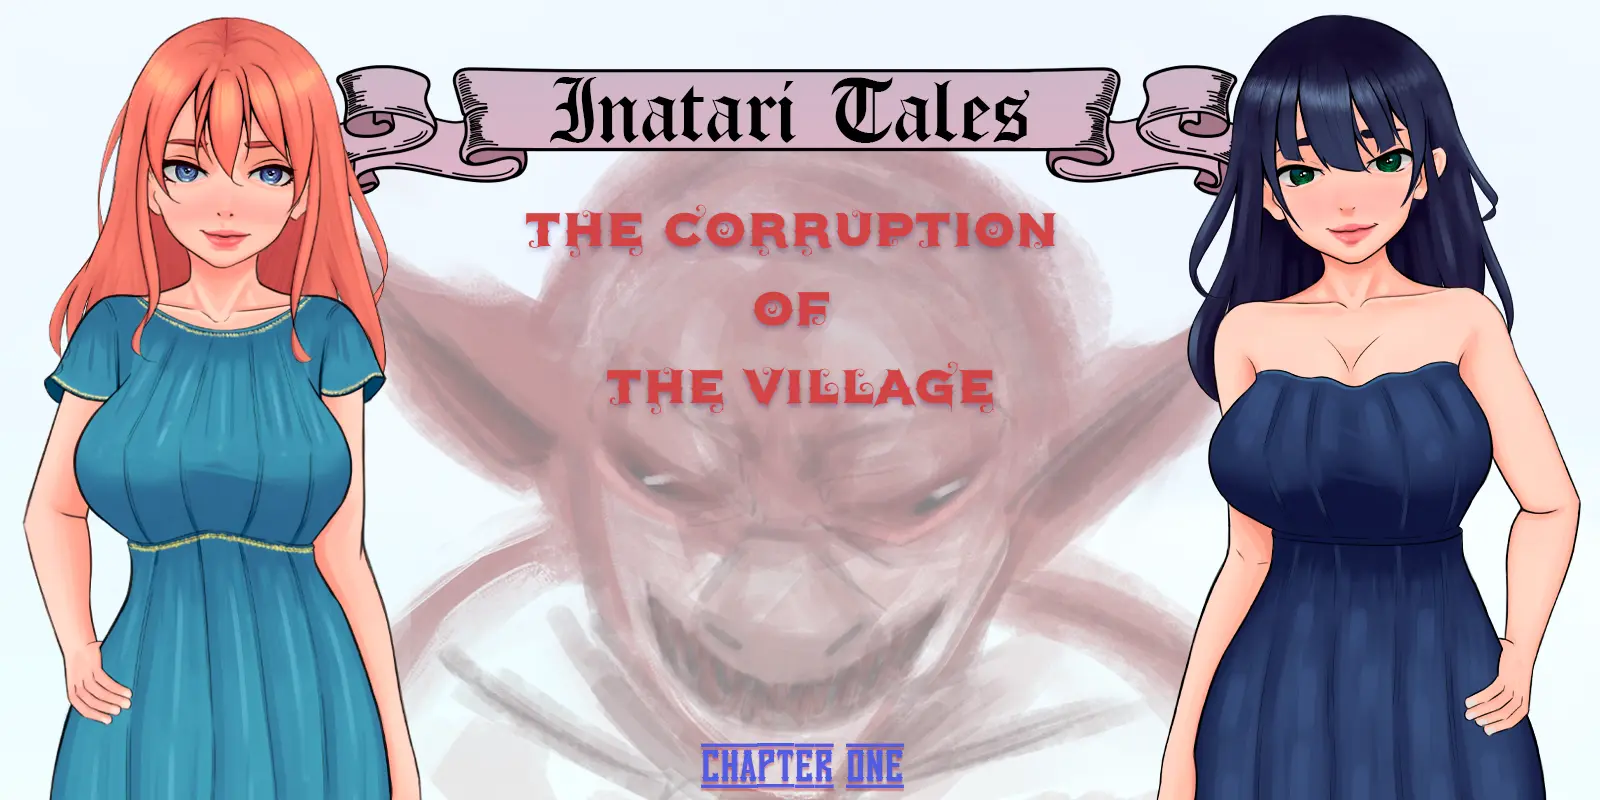 The Corruption of the Village main image